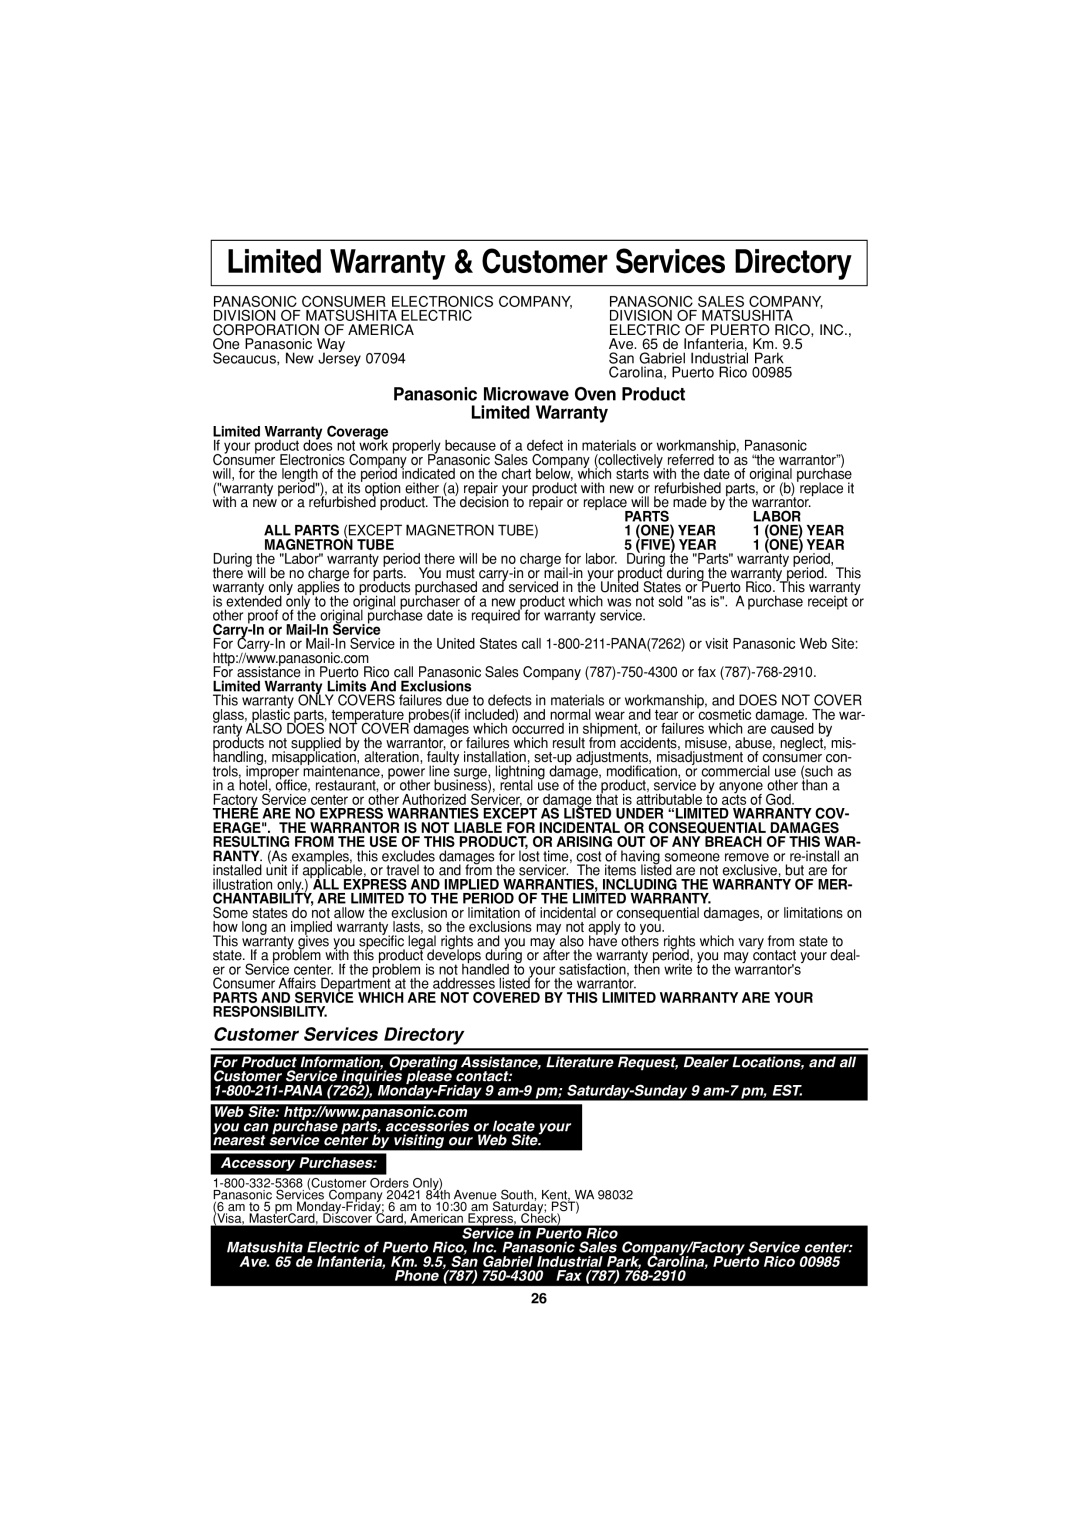 Panasonic NN-T763 Limited Warranty & Customer Services Directory, Limited Warranty Coverage, Parts, Labor, One Year 